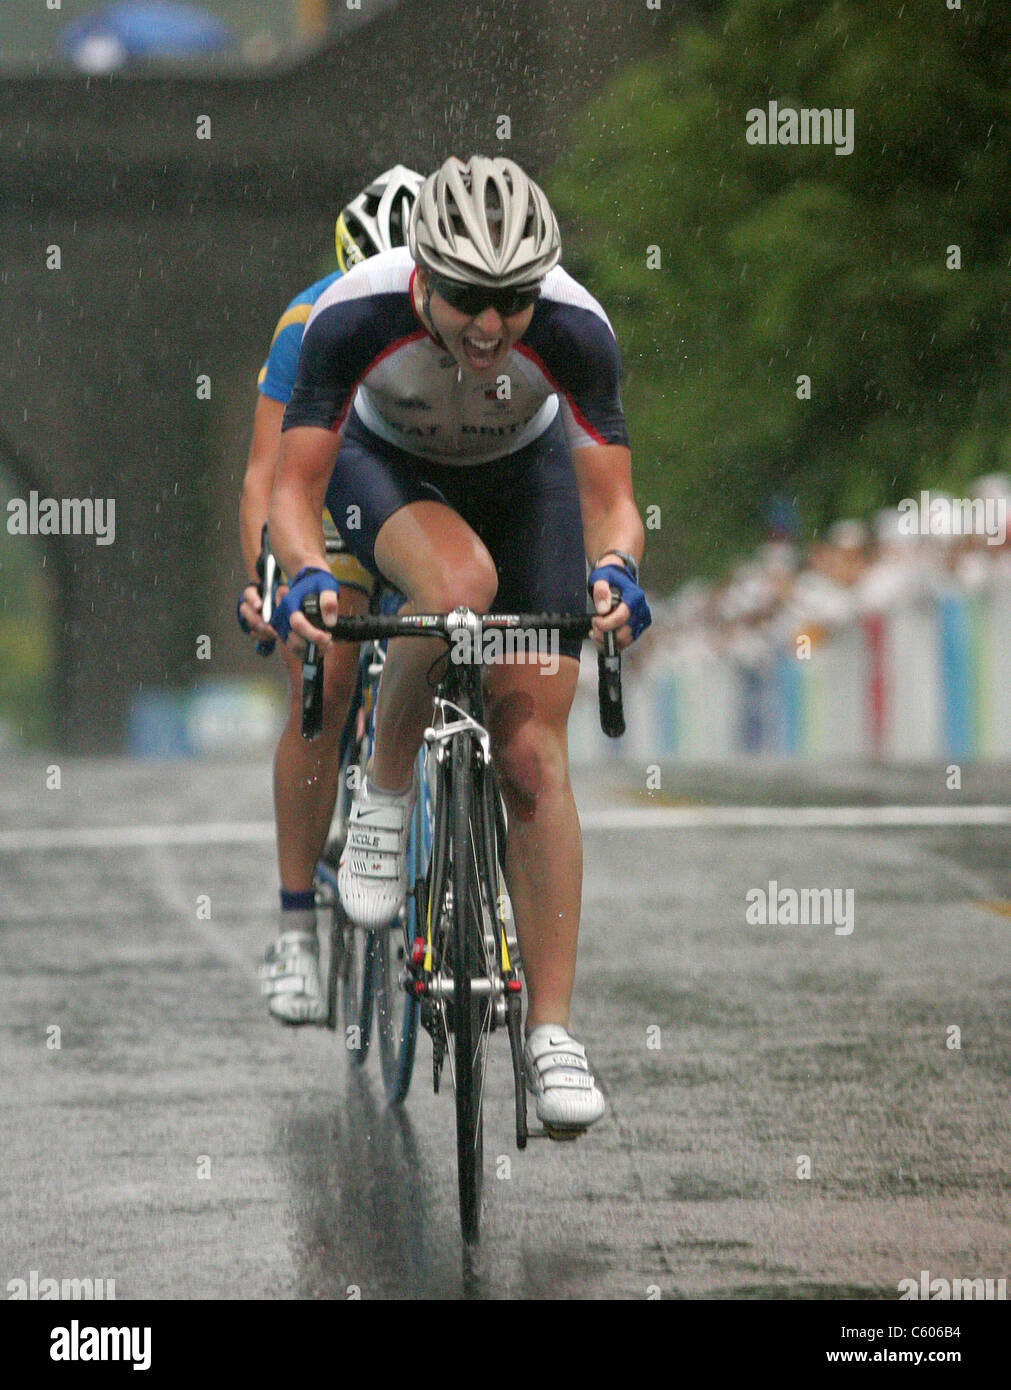 NICOLE COOKE TAKES GOLD WOMENS CYCLING ROAD RACE OLYMPIC STADIUM BEIJING CHINA 10 August 2008 Stock Photo